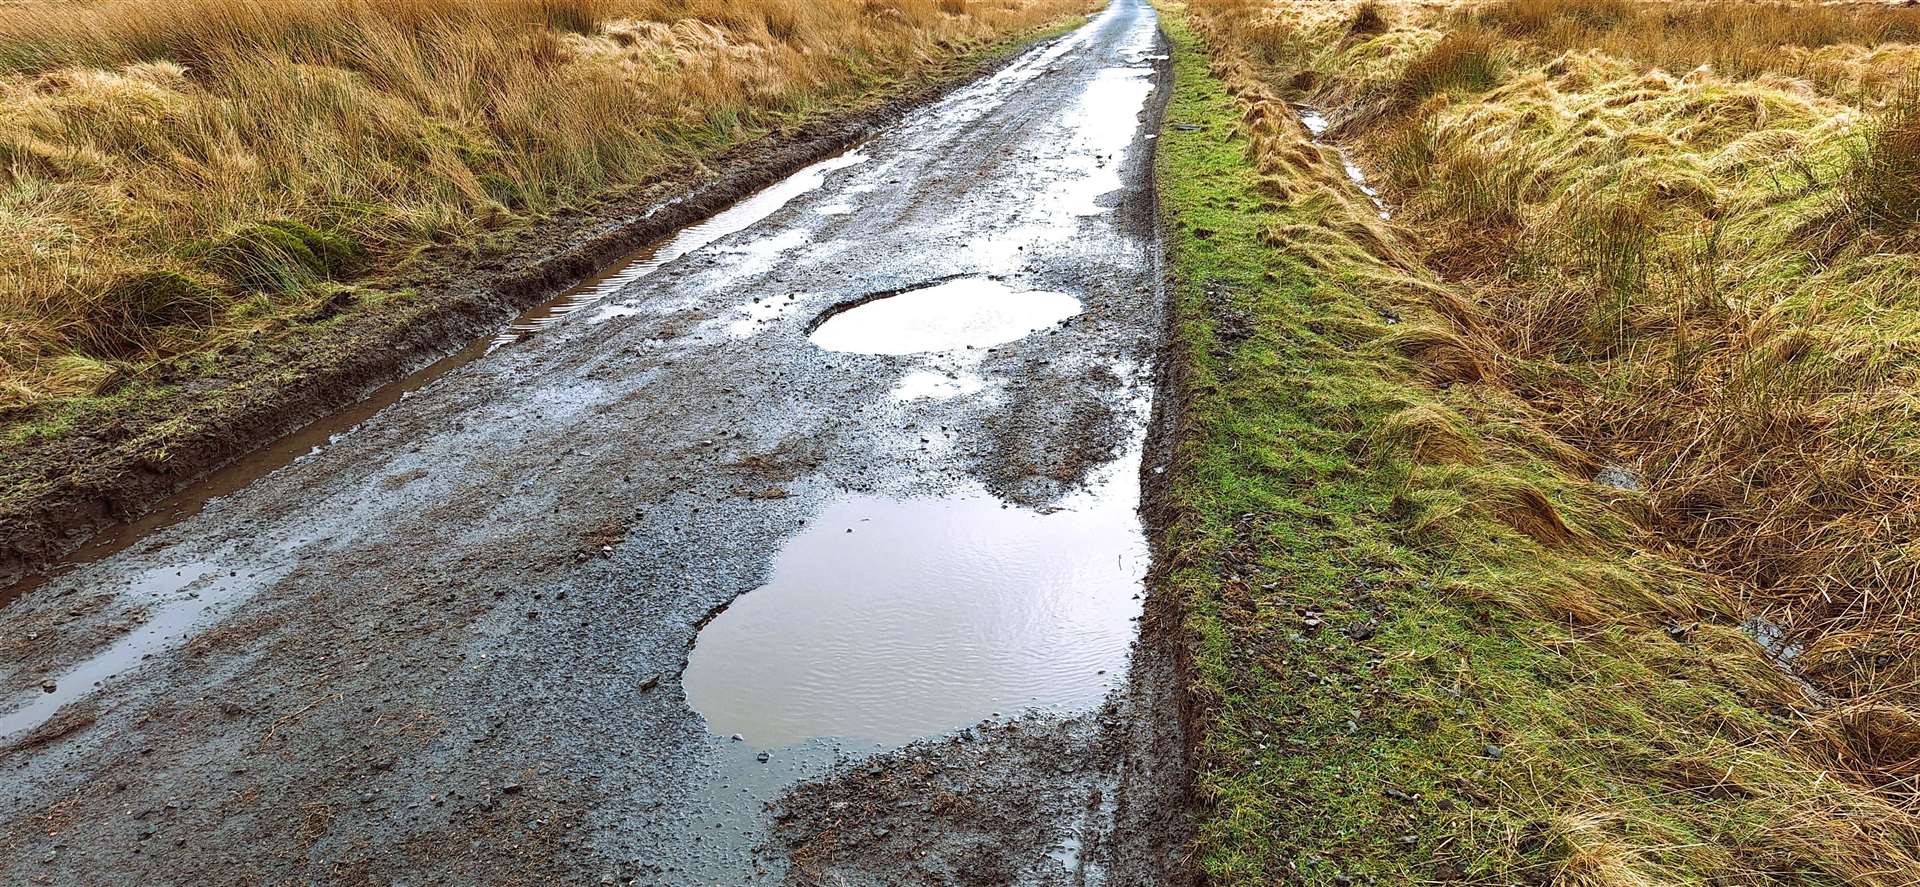 There appears to be only a small area of the road surface available to drive on at this area and little chance of avoiding the potholes without driving on the verge. Picture: DGS